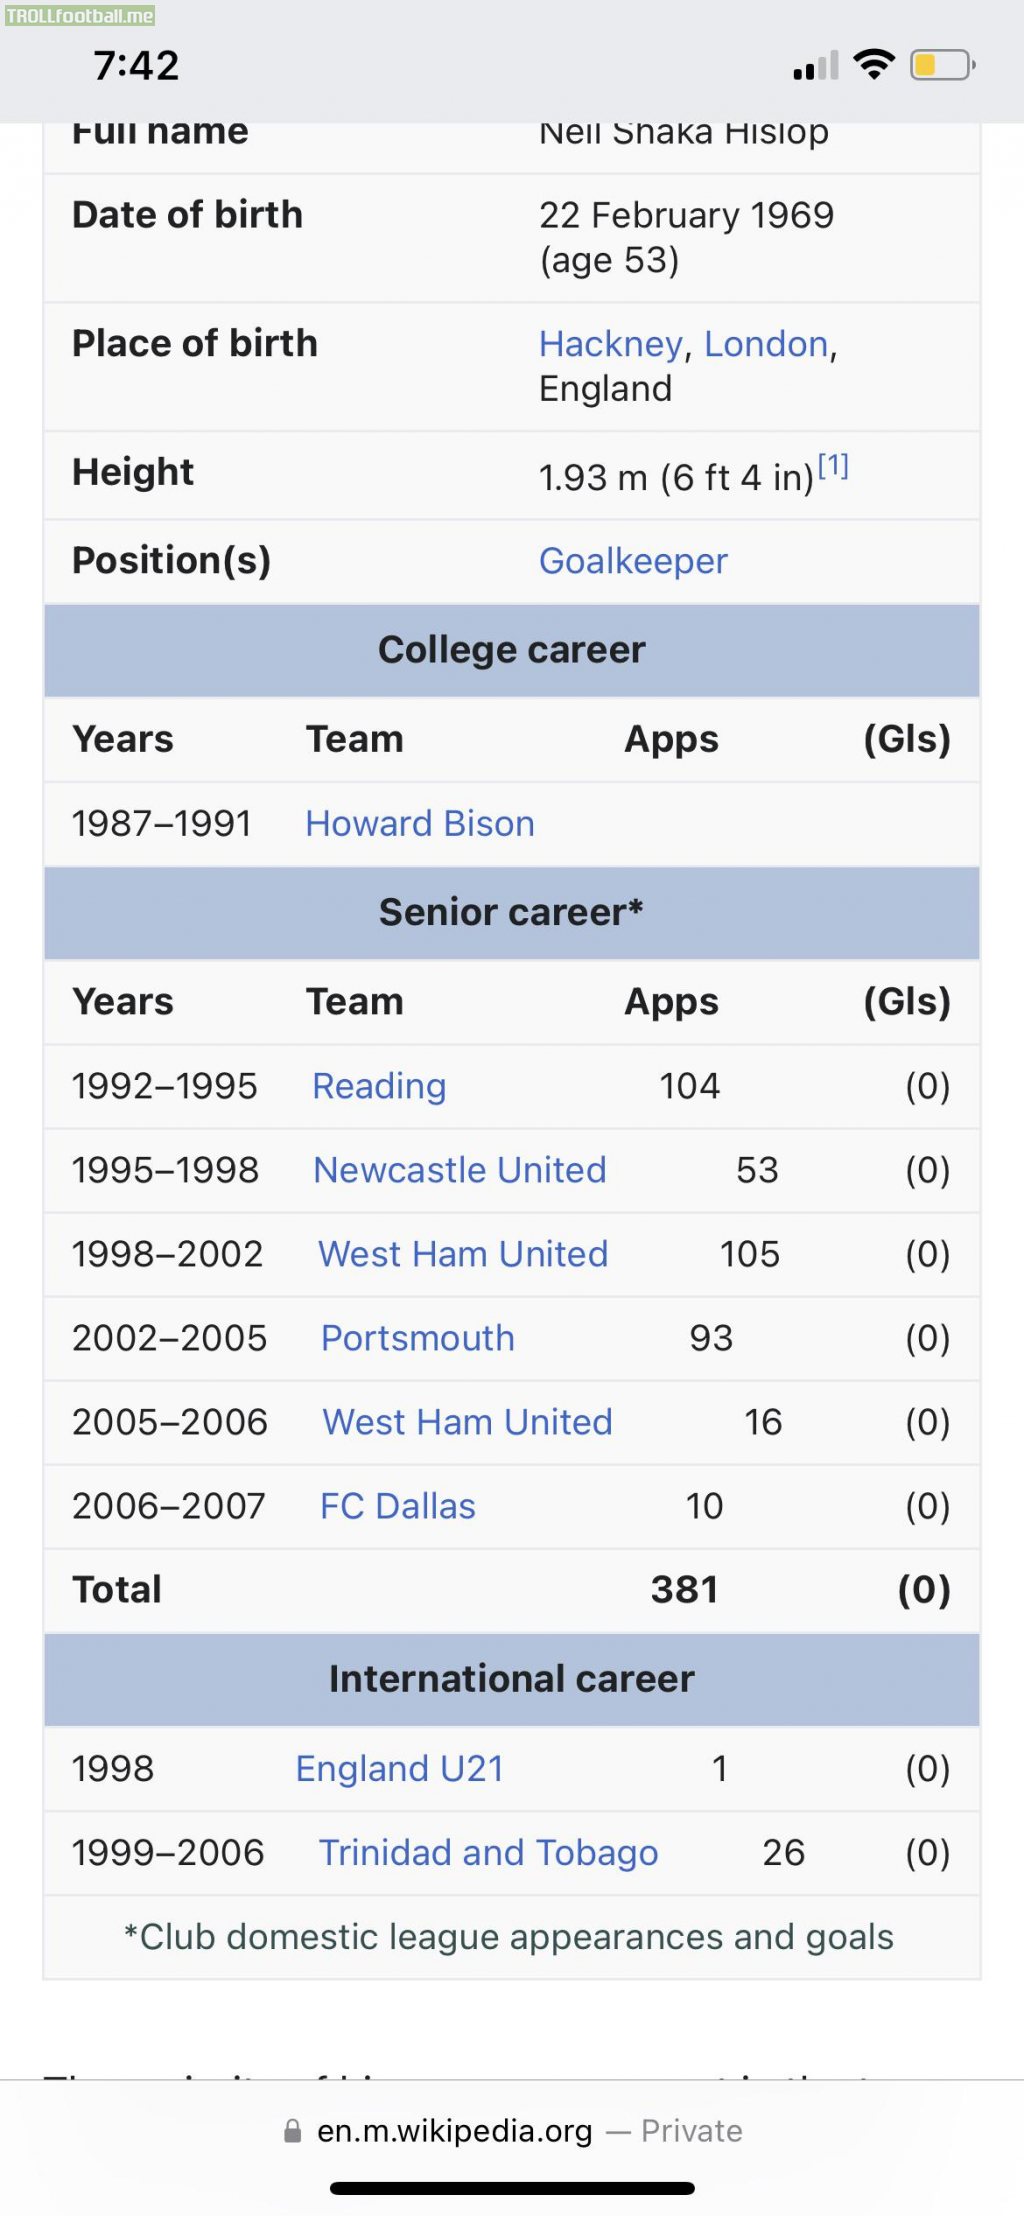 How could Saka Hislop play for a college in America in 1991 but play at the youth level in 1998?